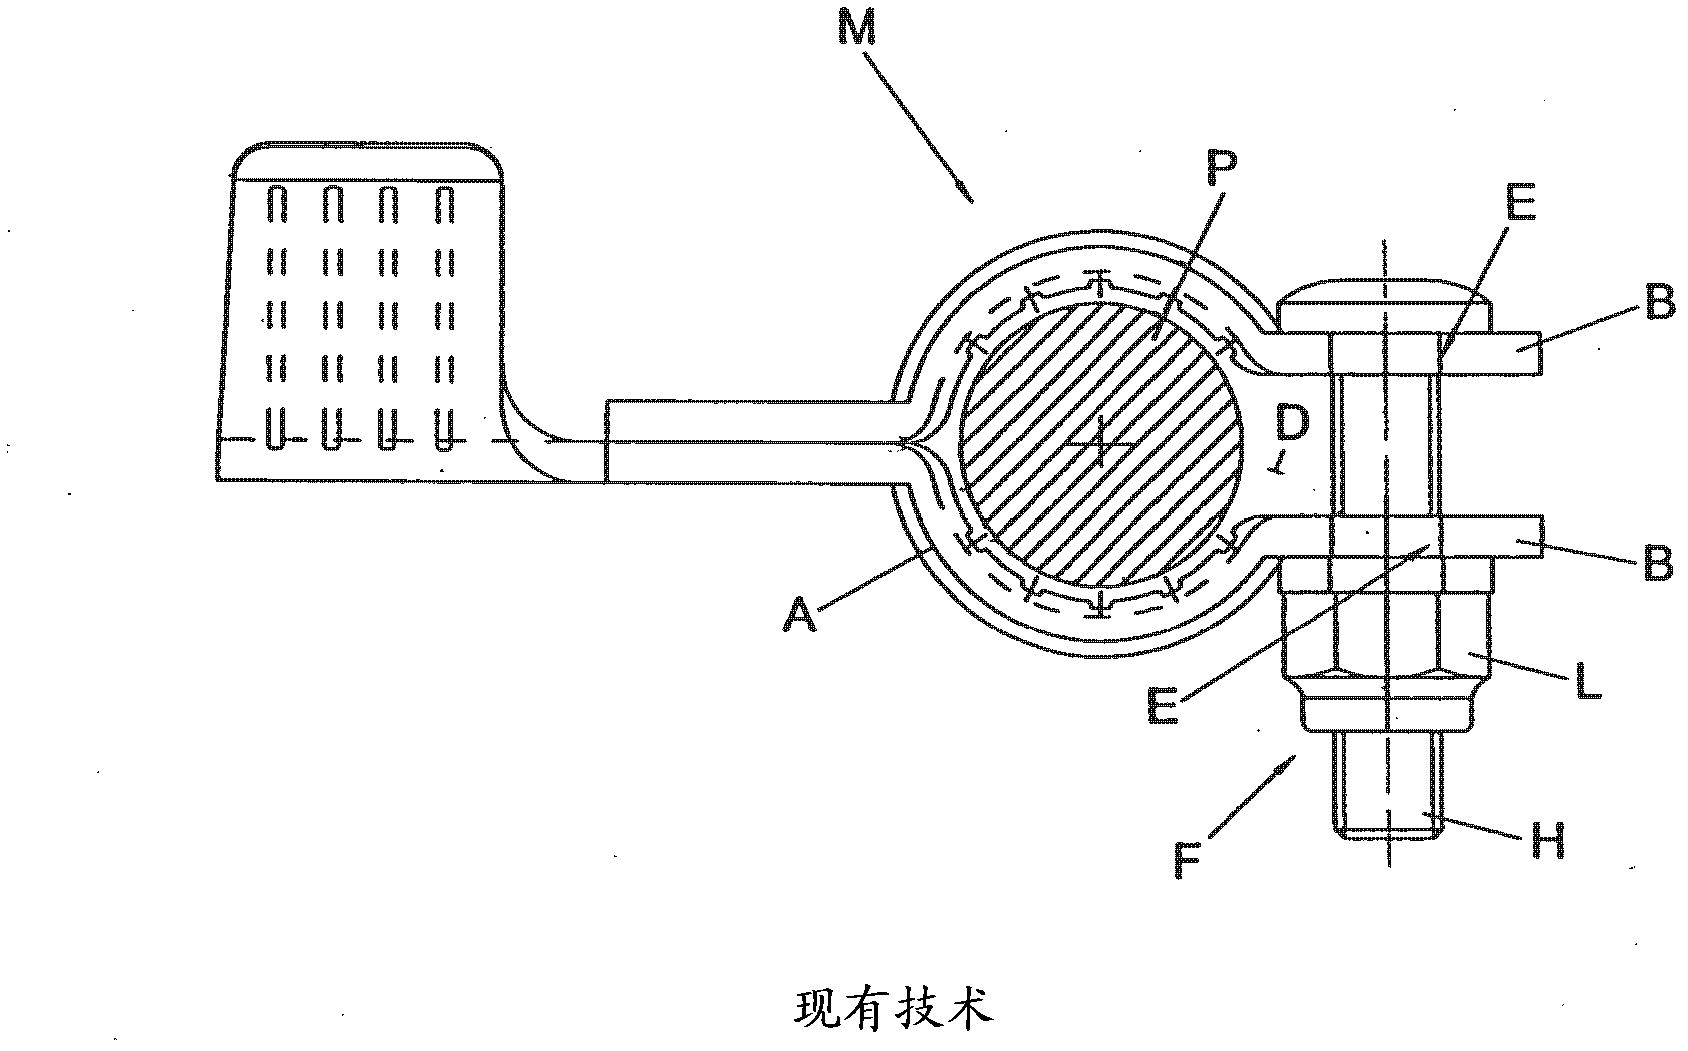 Improved clamp for connection to the poles of electrical battery